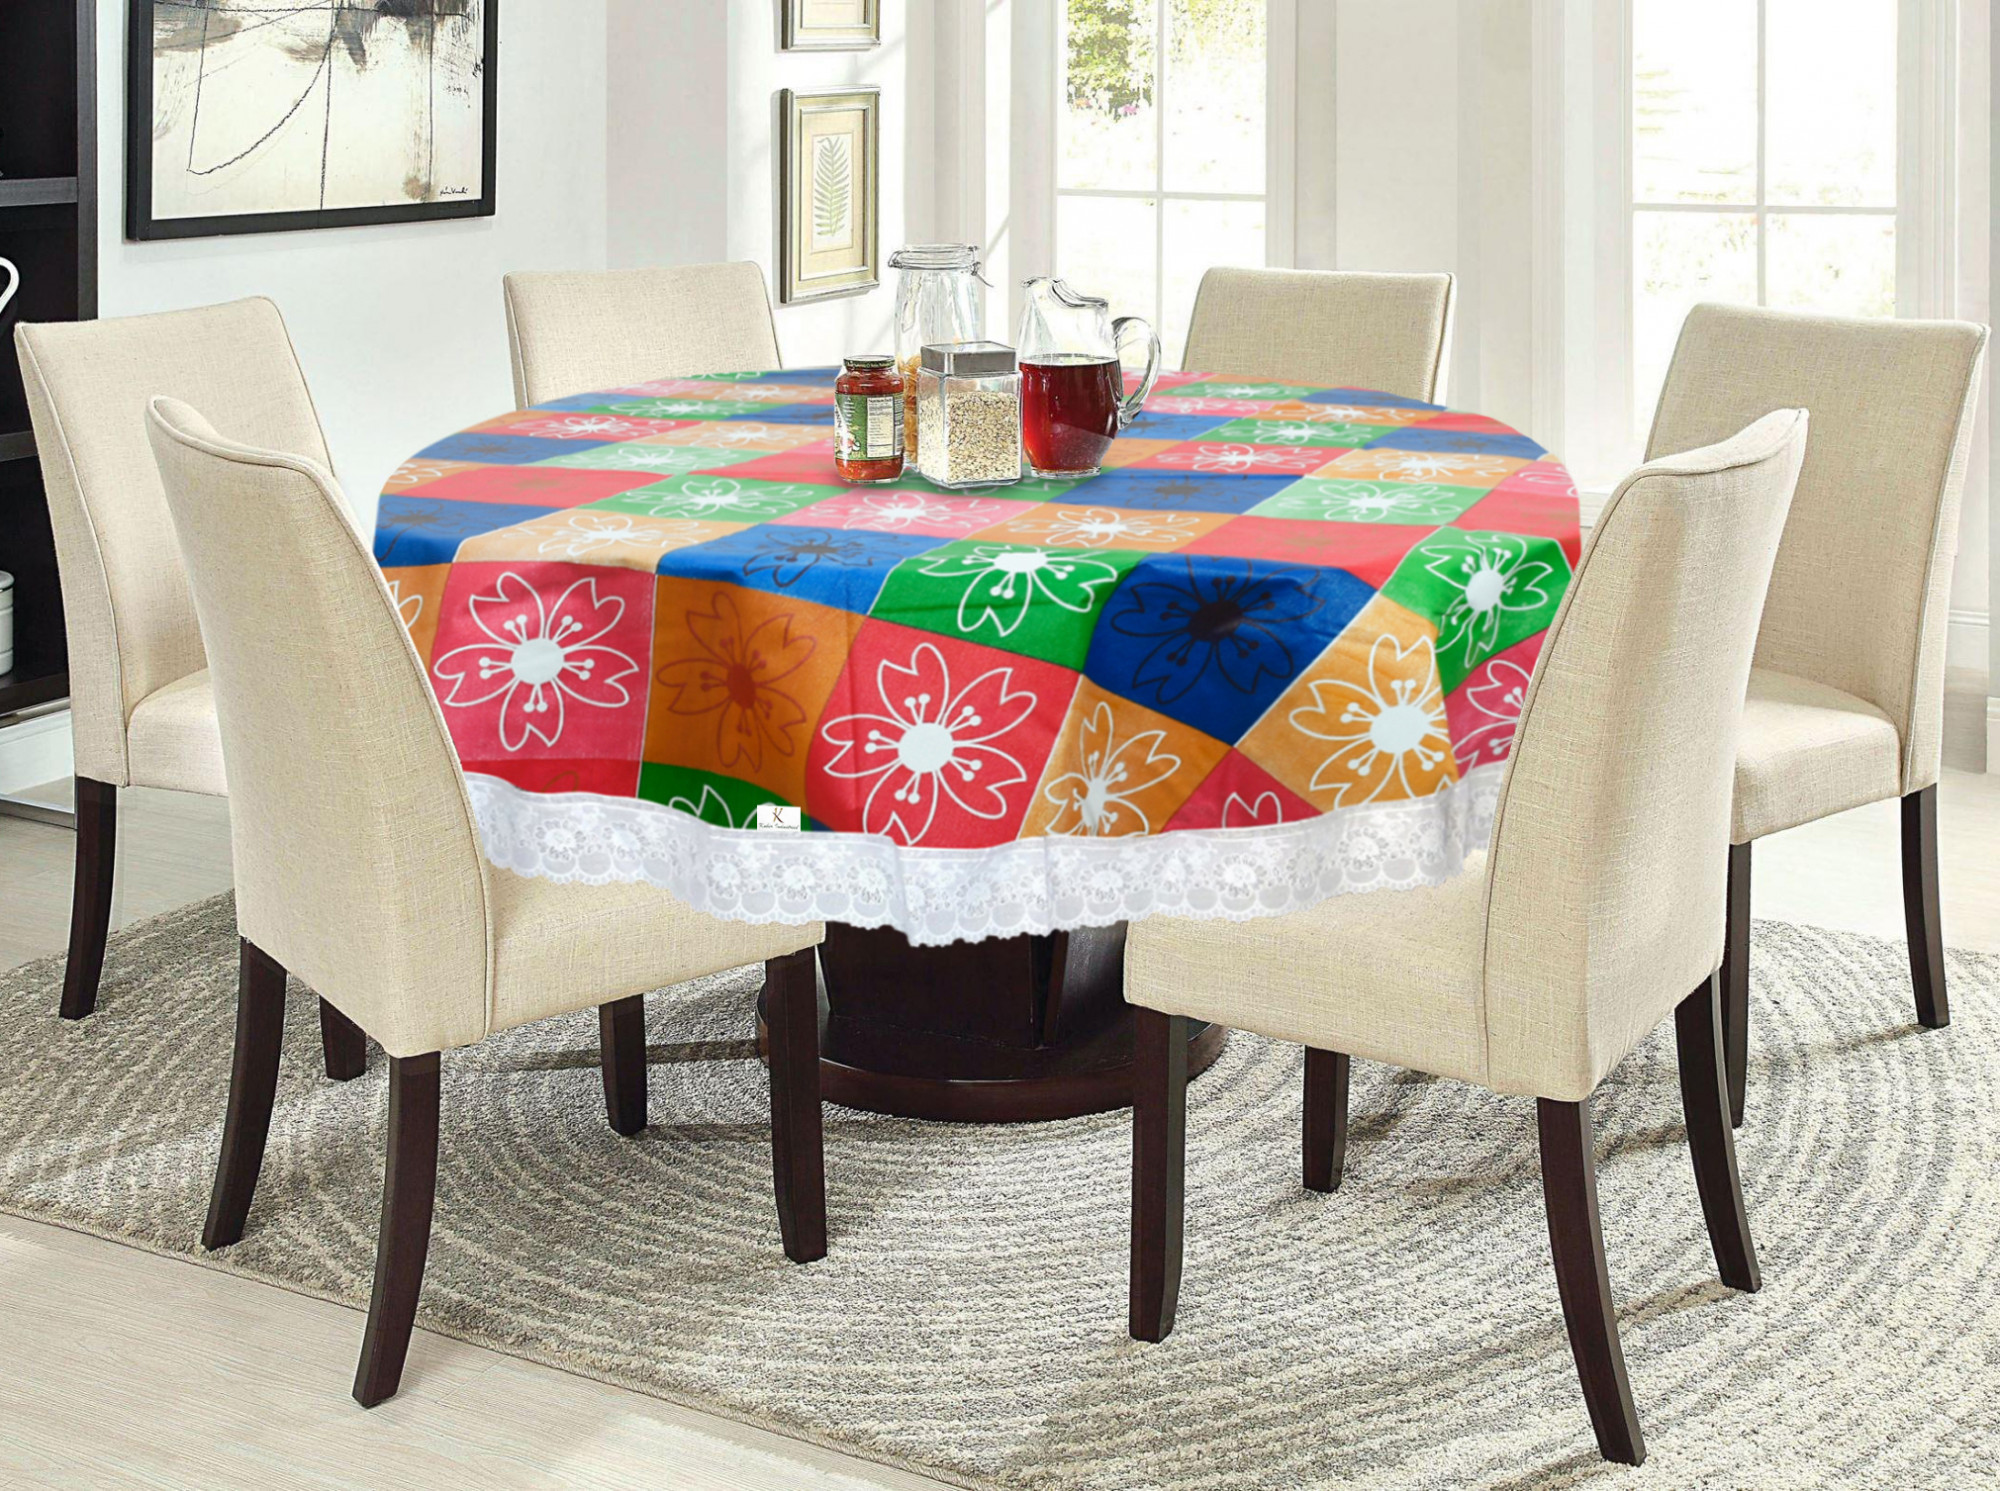 Kuber Industries Flower Print Round Table Cover 72 Inch-Waterproof PVC Resistant Spillproof PVC Fabric Table Cover for Dining Room Kitchen Party (Multi)-KUBMRT11827